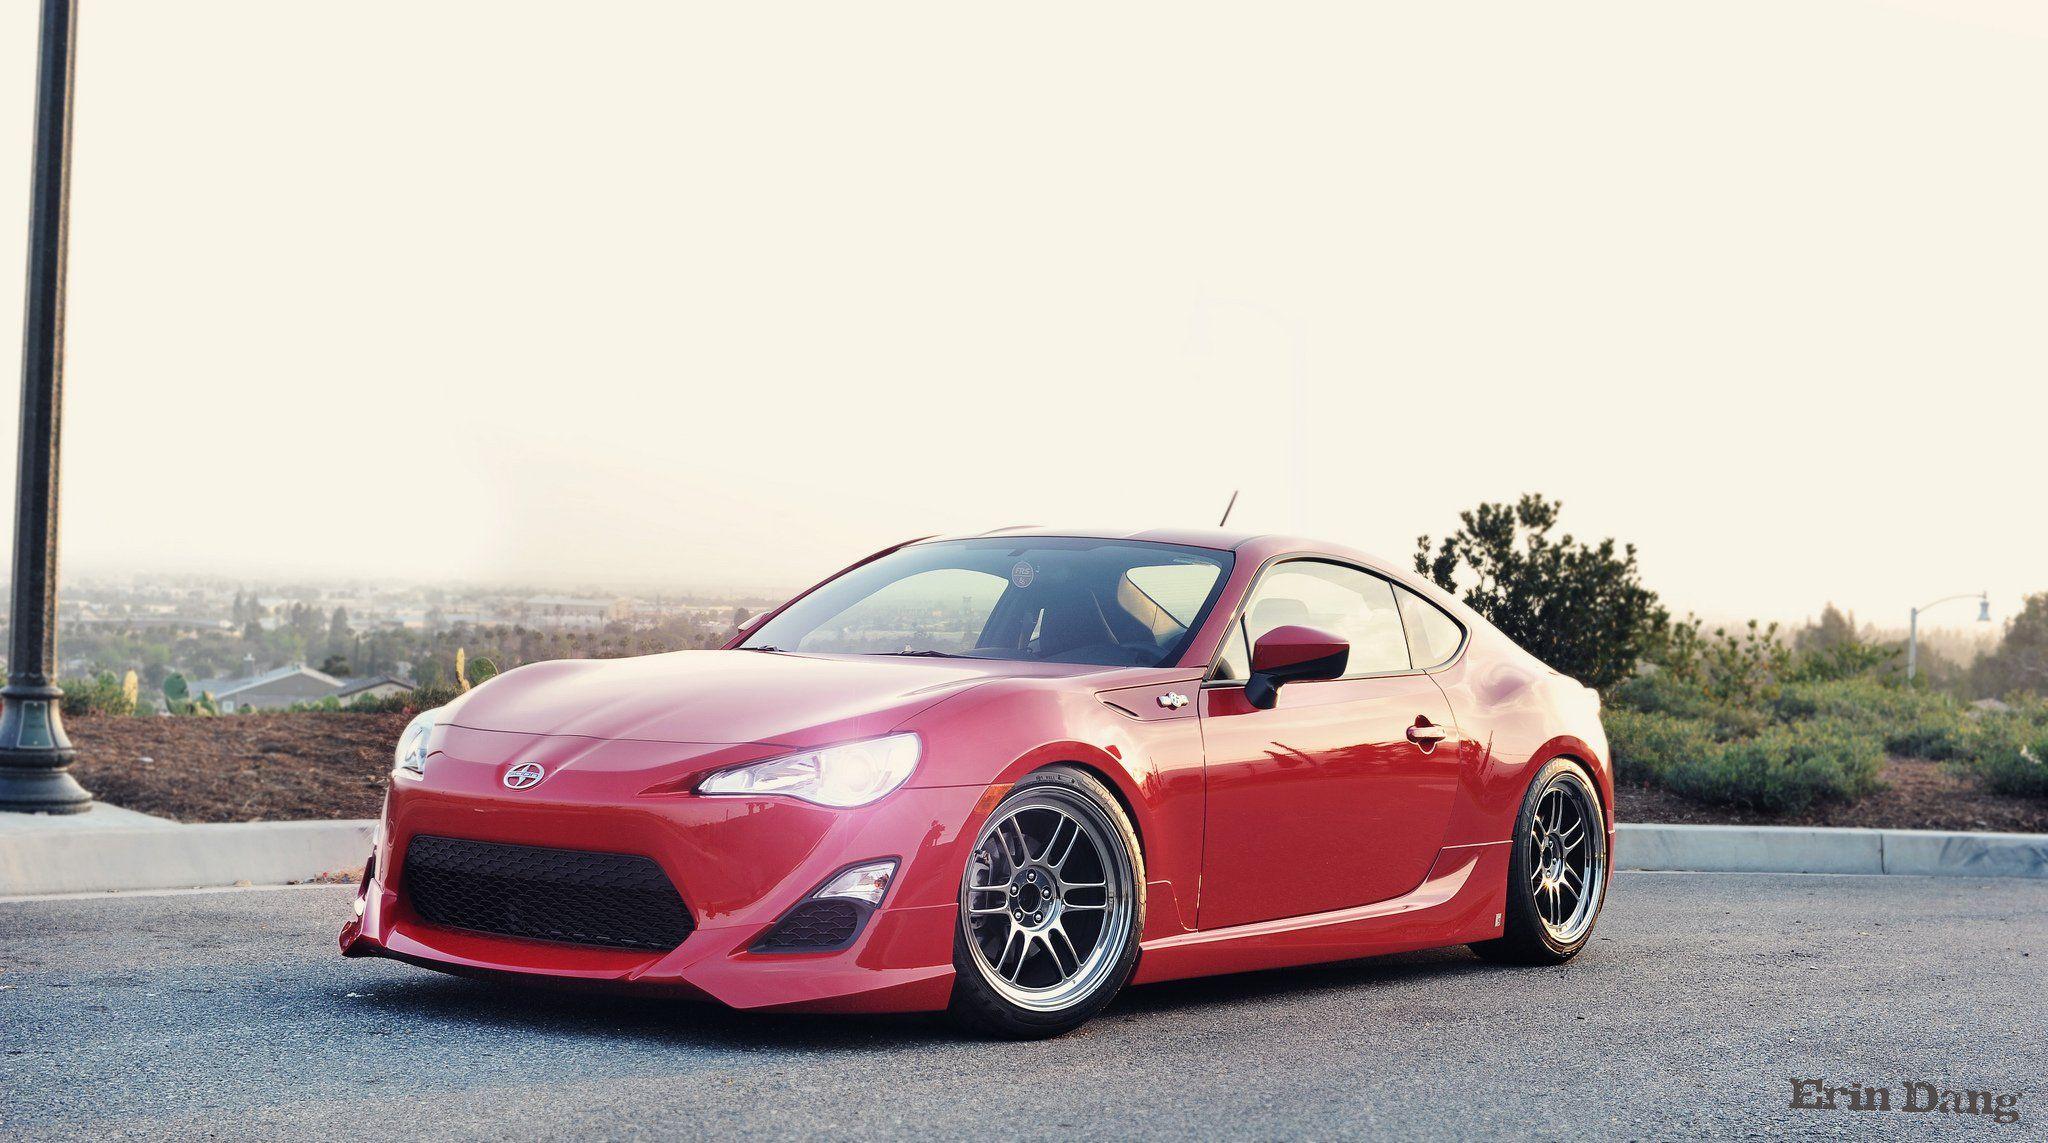 Toyota Gt86 Scion FRS Subaru BRZ Coupe Tuning Cars Japan Wallpaper